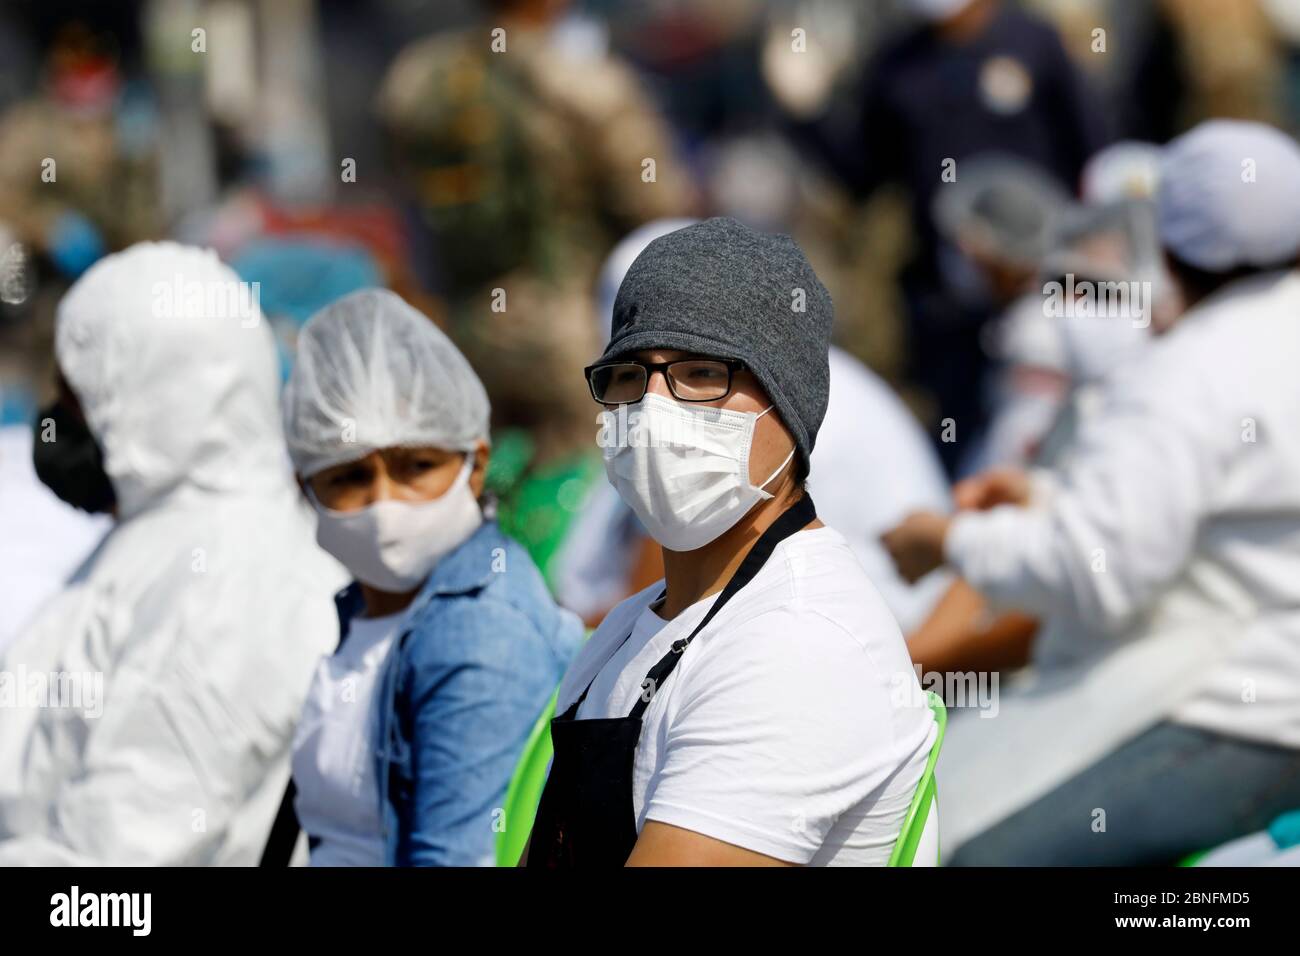 Lima, Peru. 14th May, 2020. A group of market vendors wait for blood rapid diagnostic tests for the new coronavirus disease, COVID-19 at a market in Villa El Salvador Credit: Mariana Bazo/ZUMA Wire/Alamy Live News Stock Photo